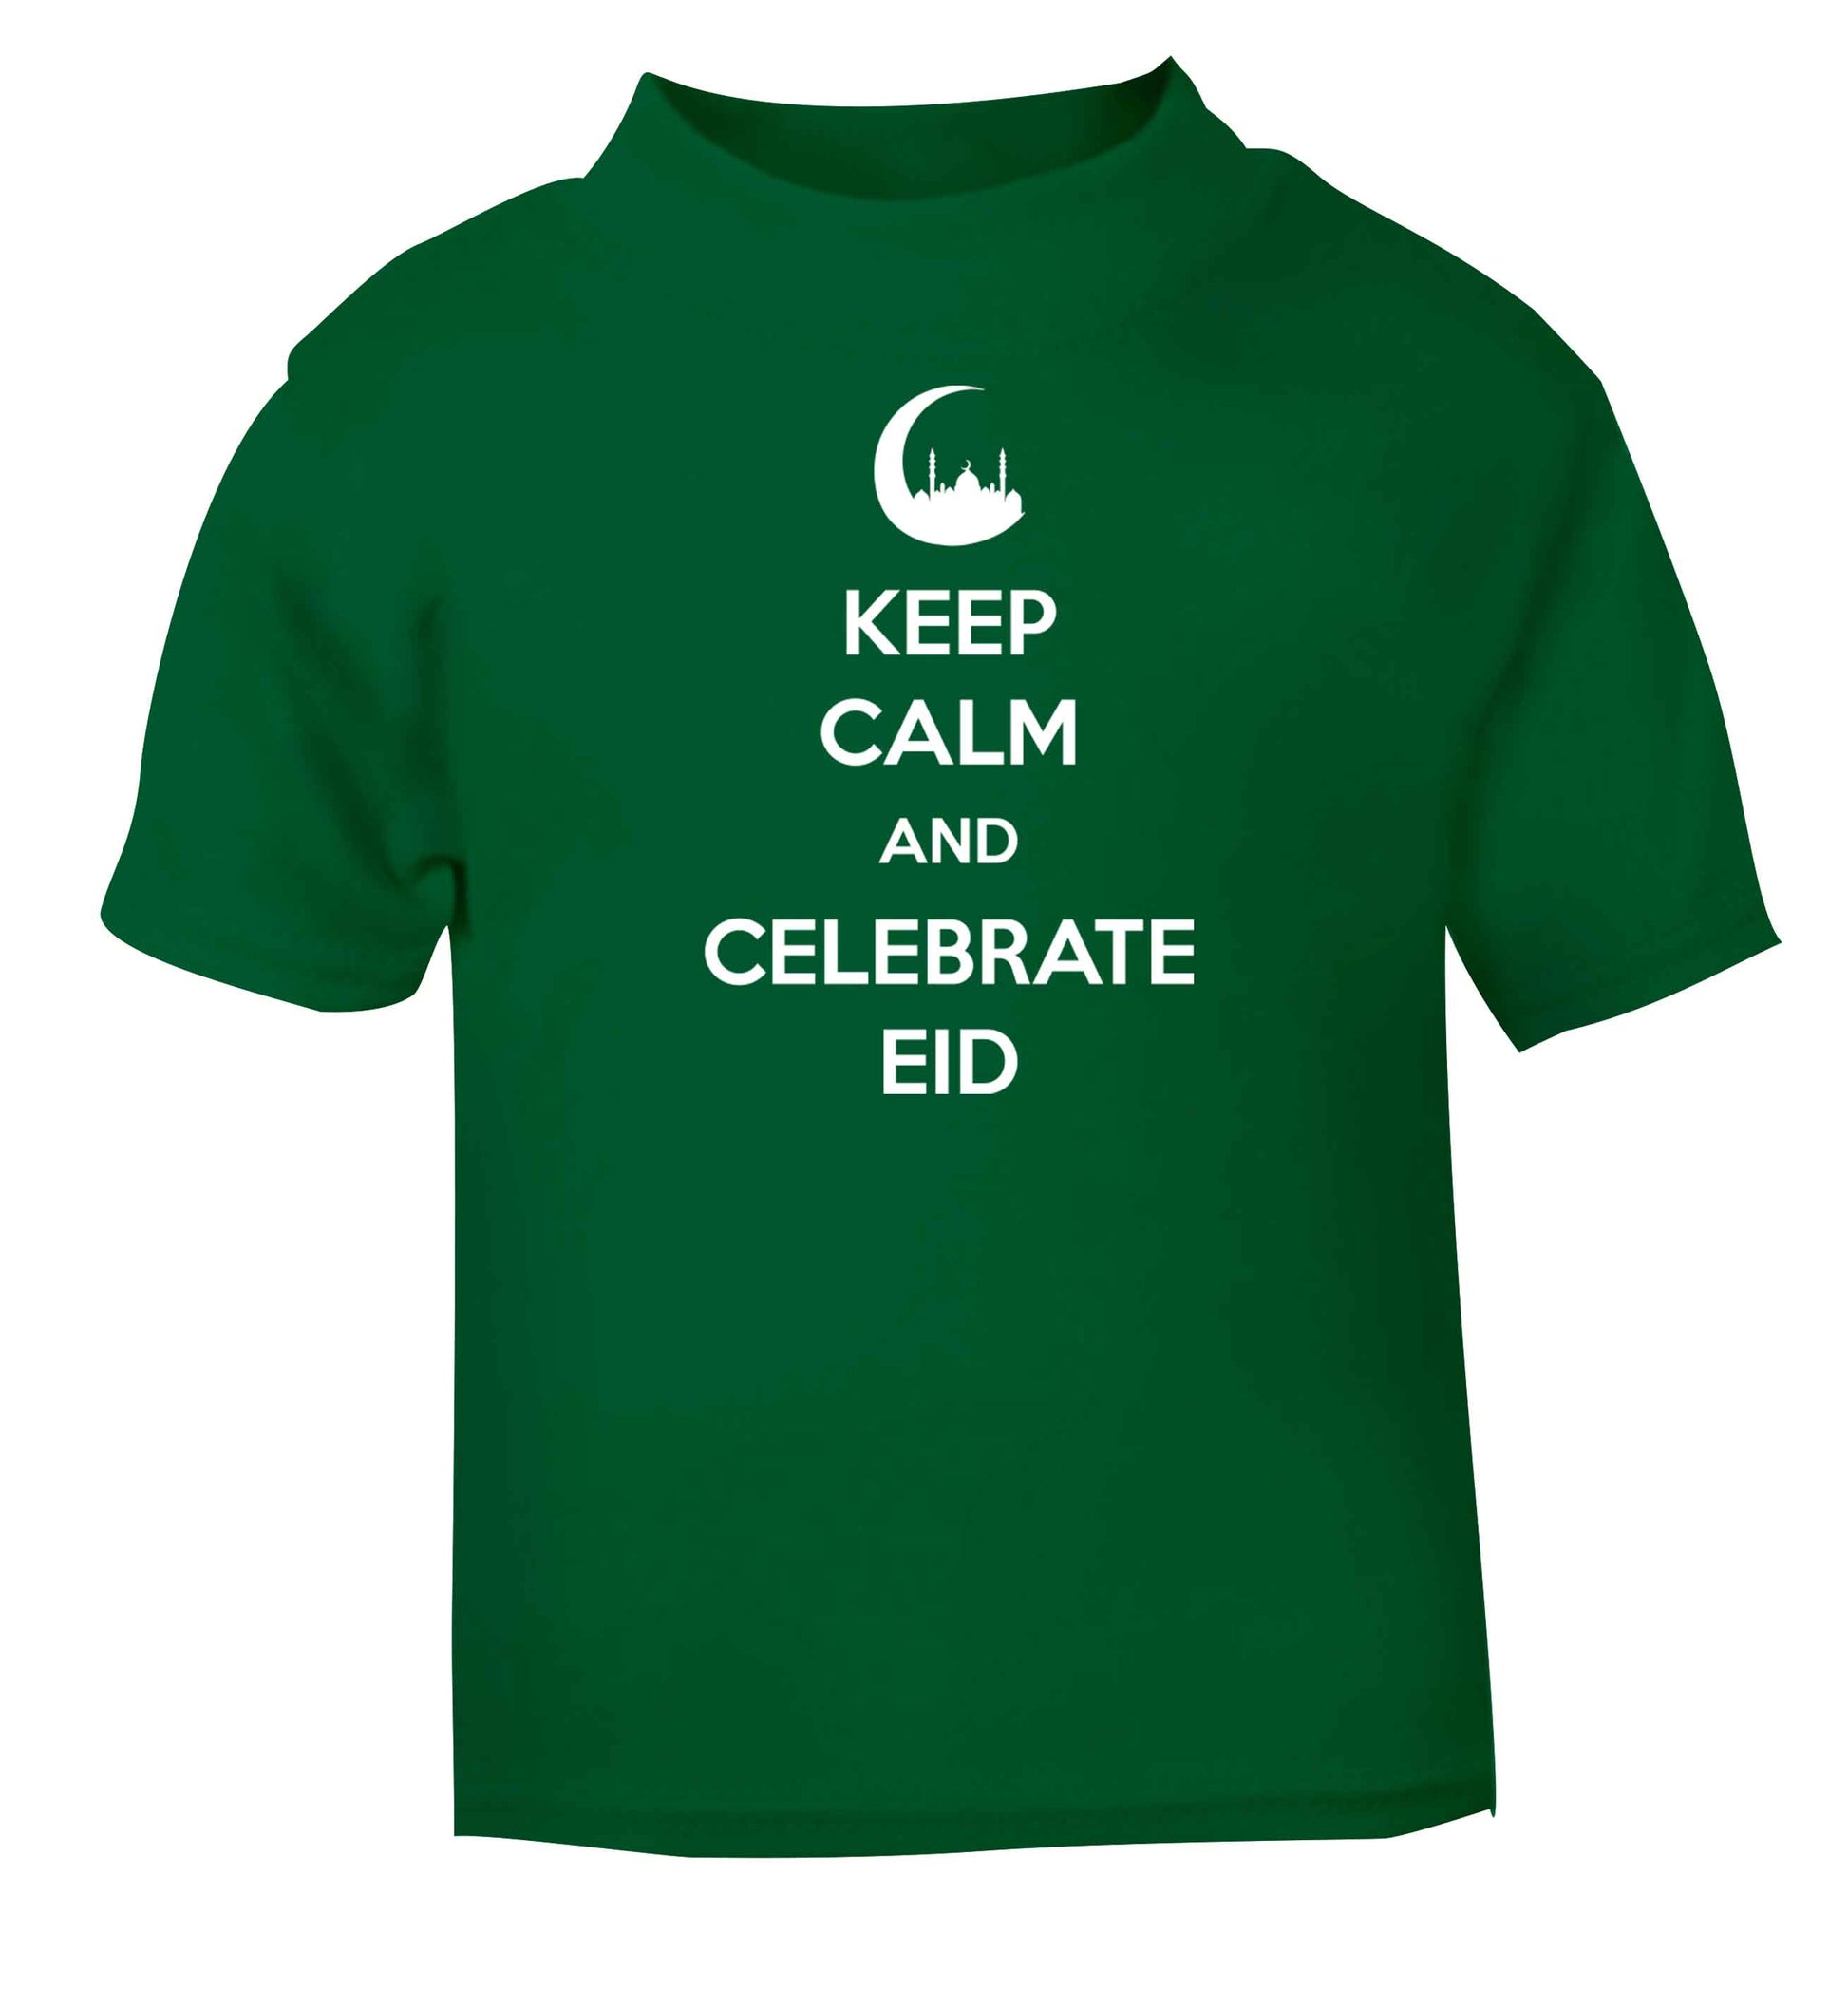 Keep calm and celebrate Eid green baby toddler Tshirt 2 Years